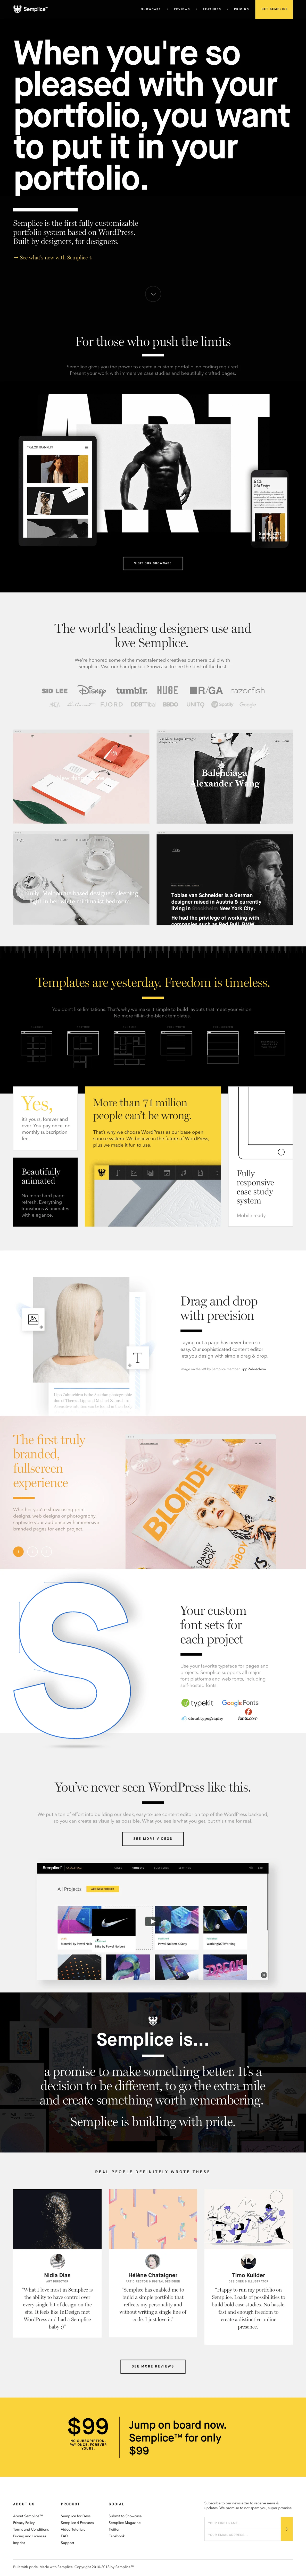 Semplice Landing Page Example: Build your portfolio with Semplice and build fully responsive case studies & custom branded project pages with just a few clicks.